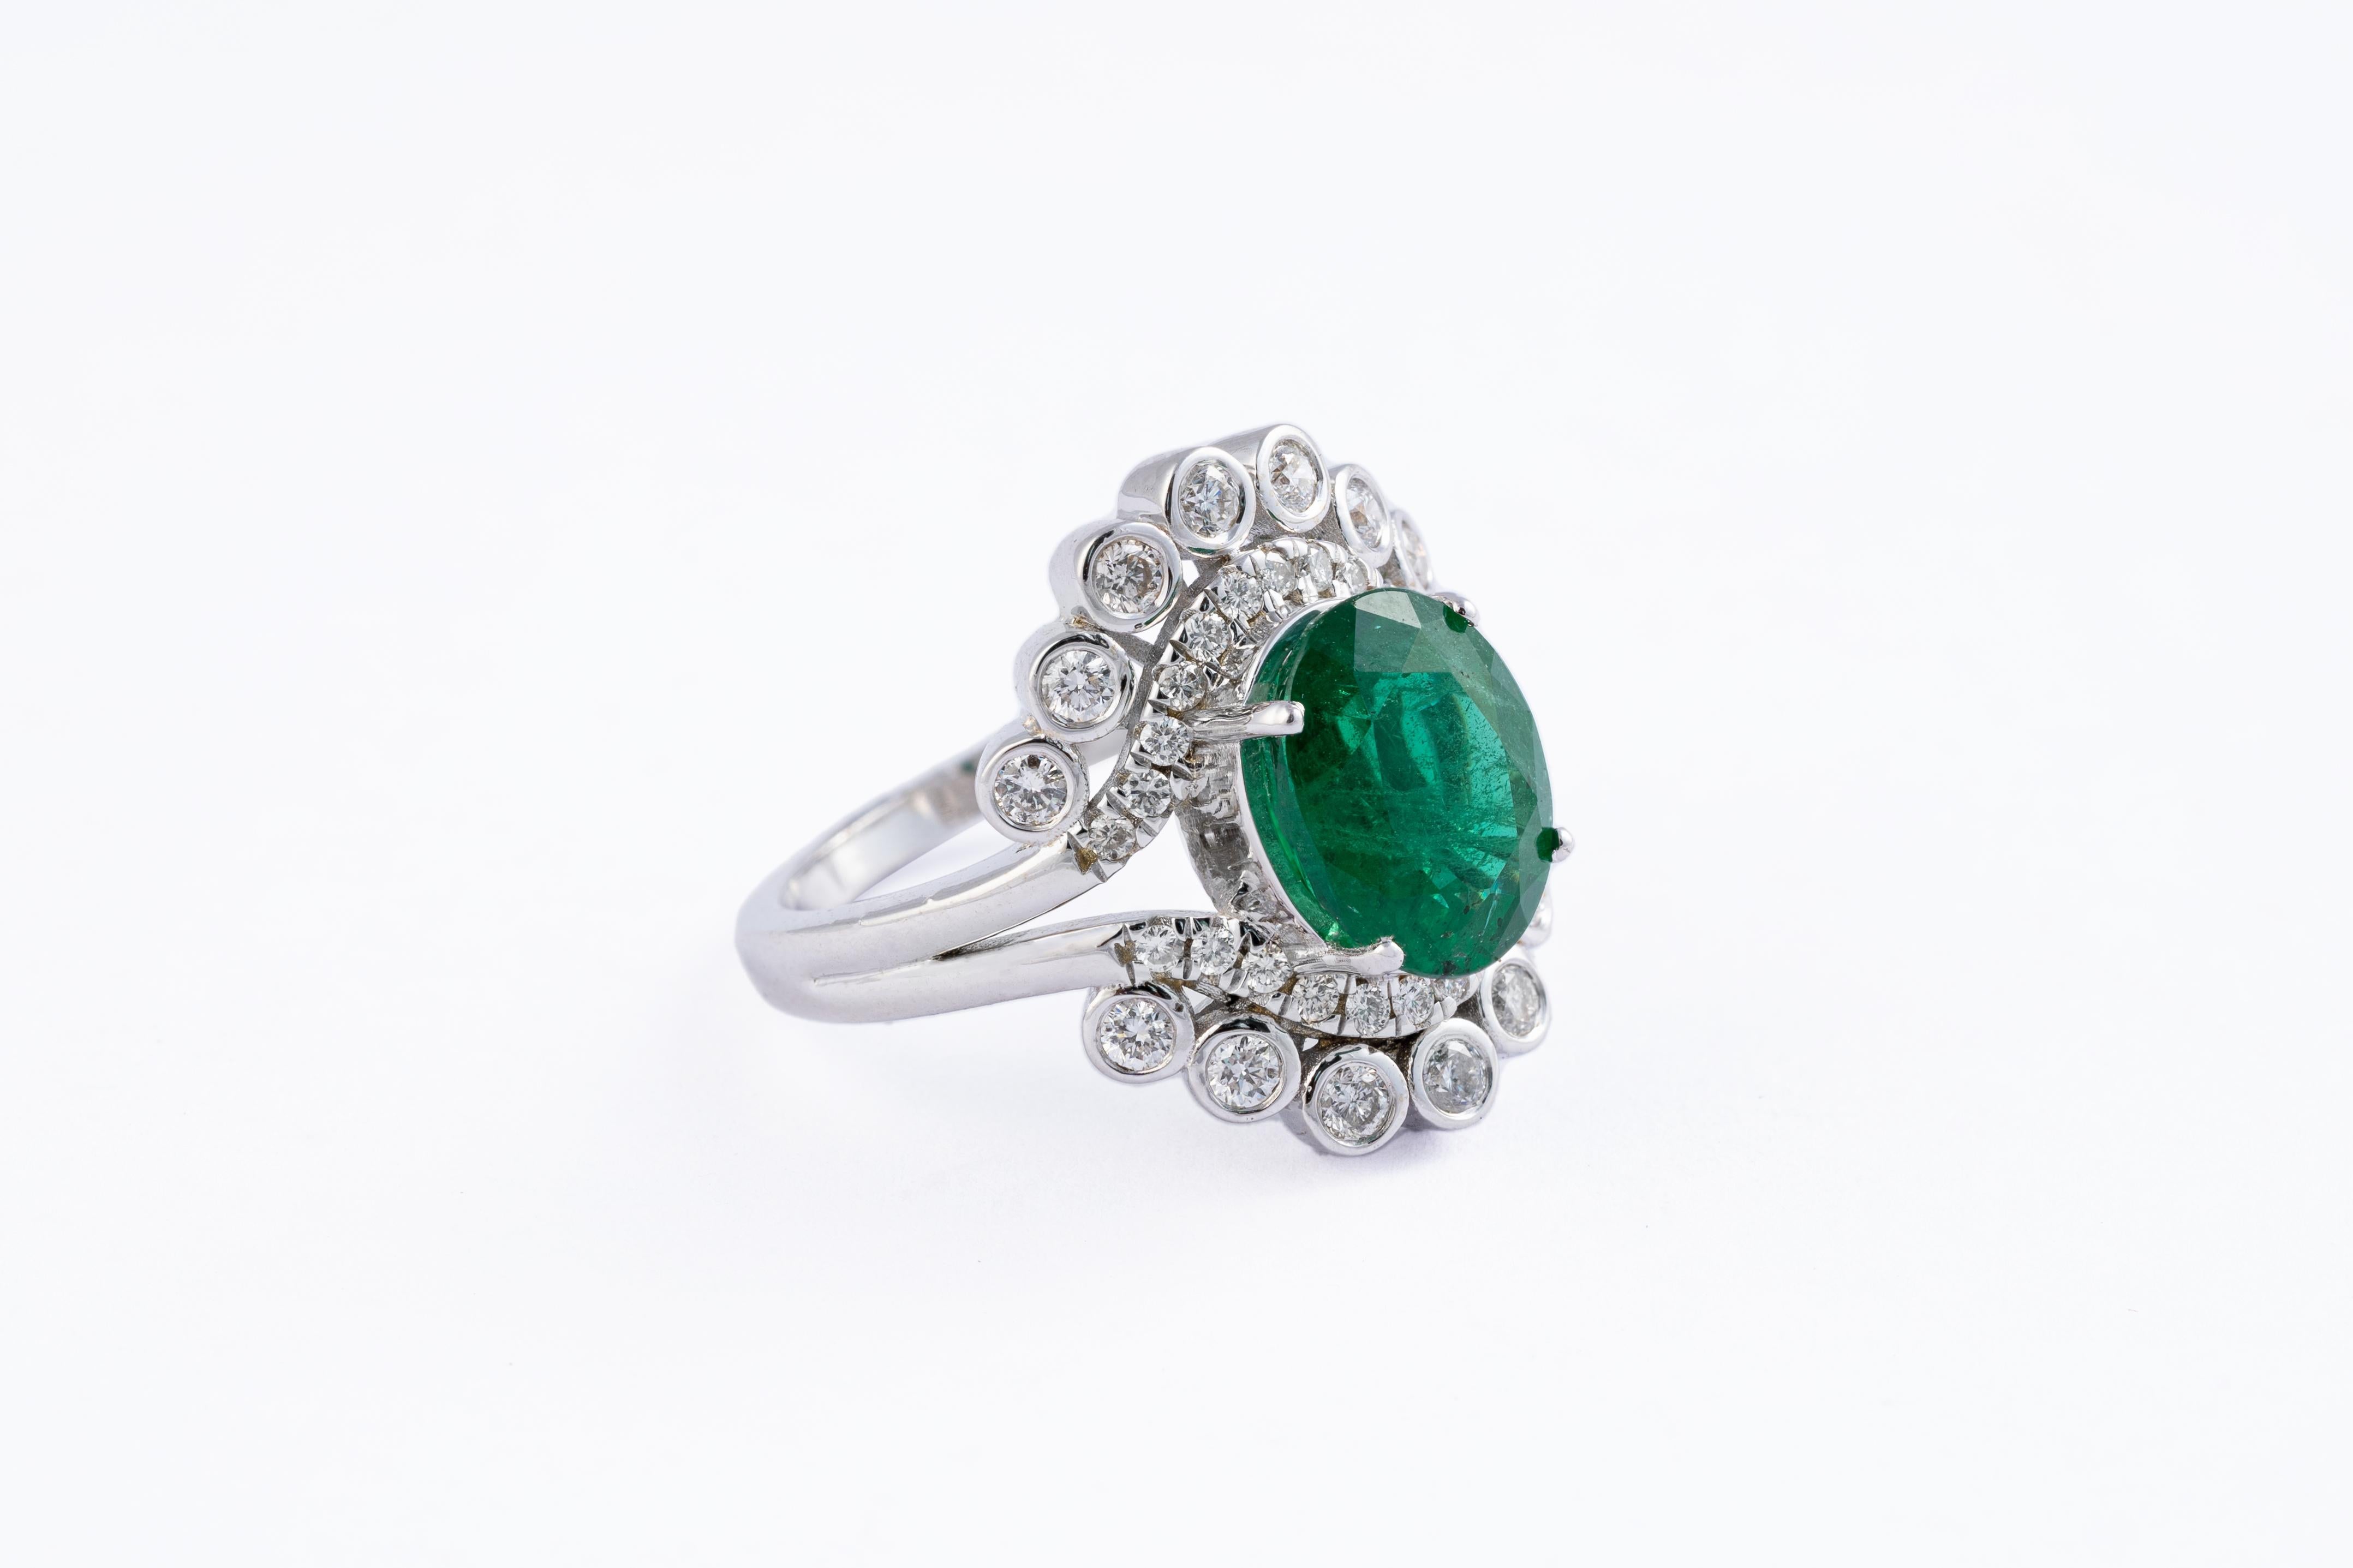 This is an amazing everyday wear ring with high quality Zambian natural emerald and very good clarity diamonds which are vsi in clarity and G colour

emeralds: 2.96 cts
diamonds : 0.65 cts
gold : 5.88 gms